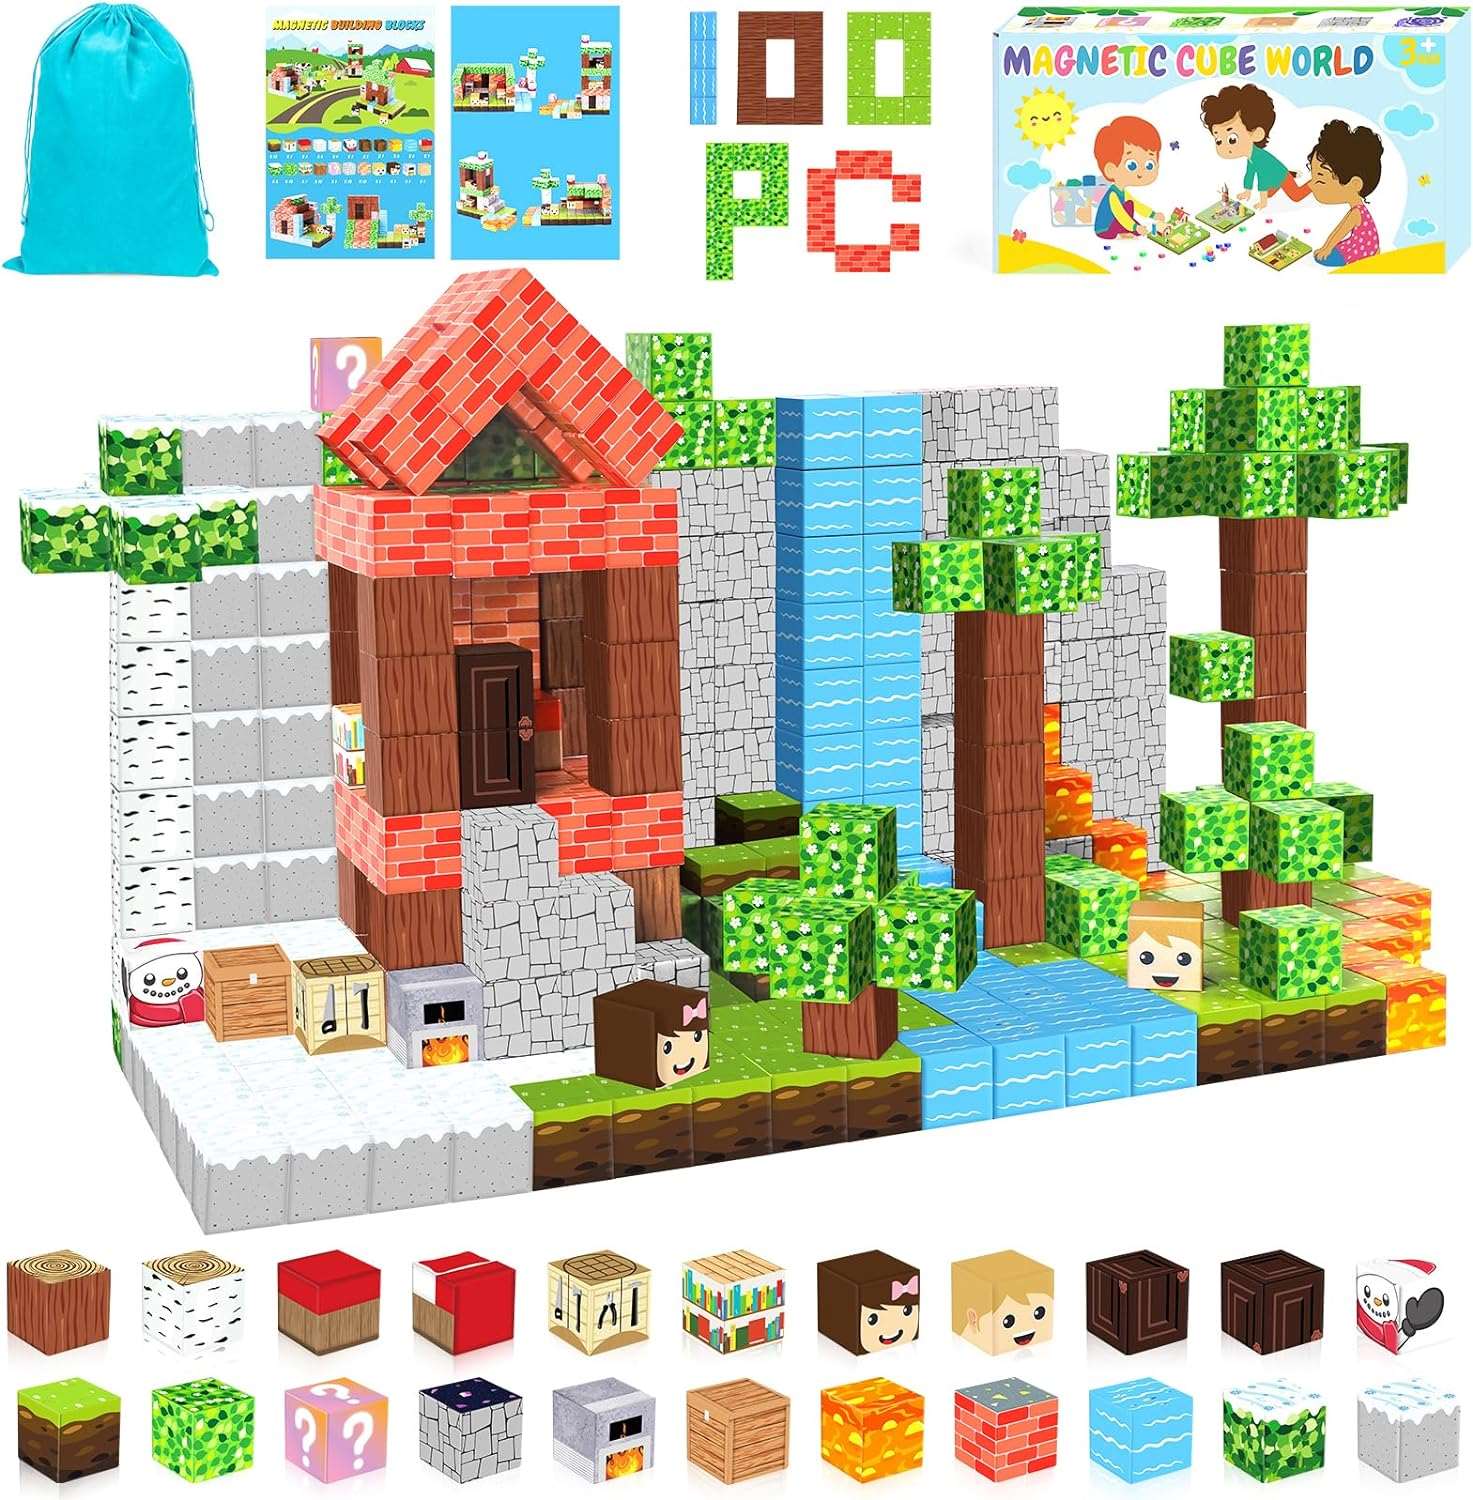 100PCS Magnetic Blocks Building Toys for 3-13 Year Old Kids Boys Girls, The Magnet World Building Set - Cykapu